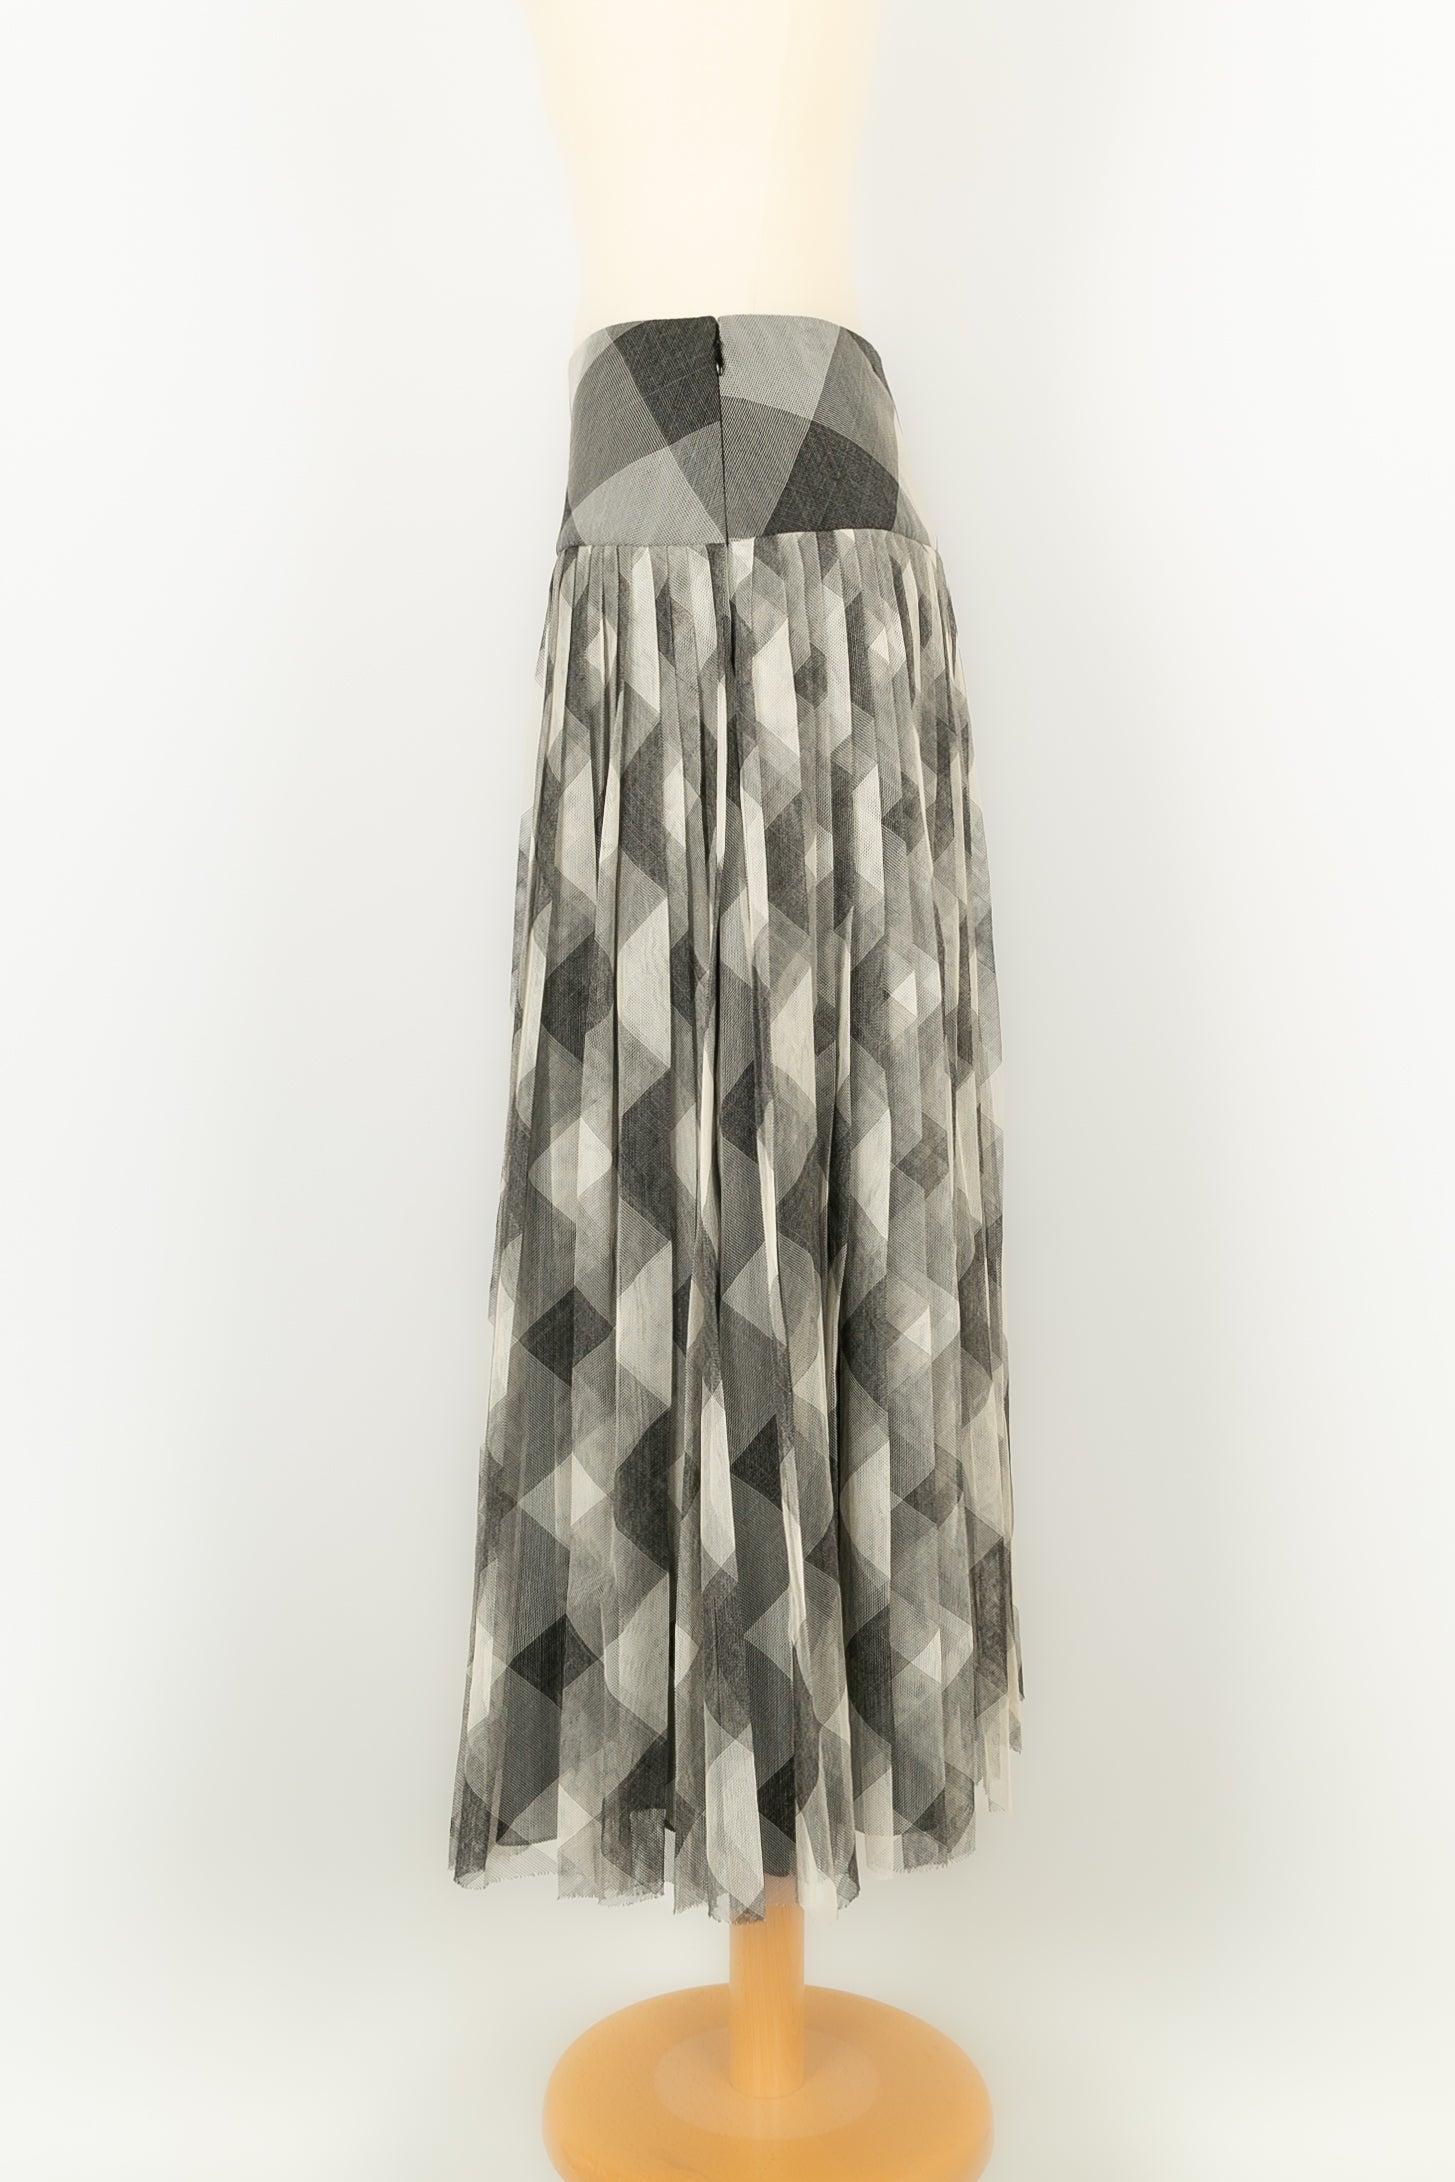 Dior Skirt in Grey-Tone Blended Cotton For Sale 1